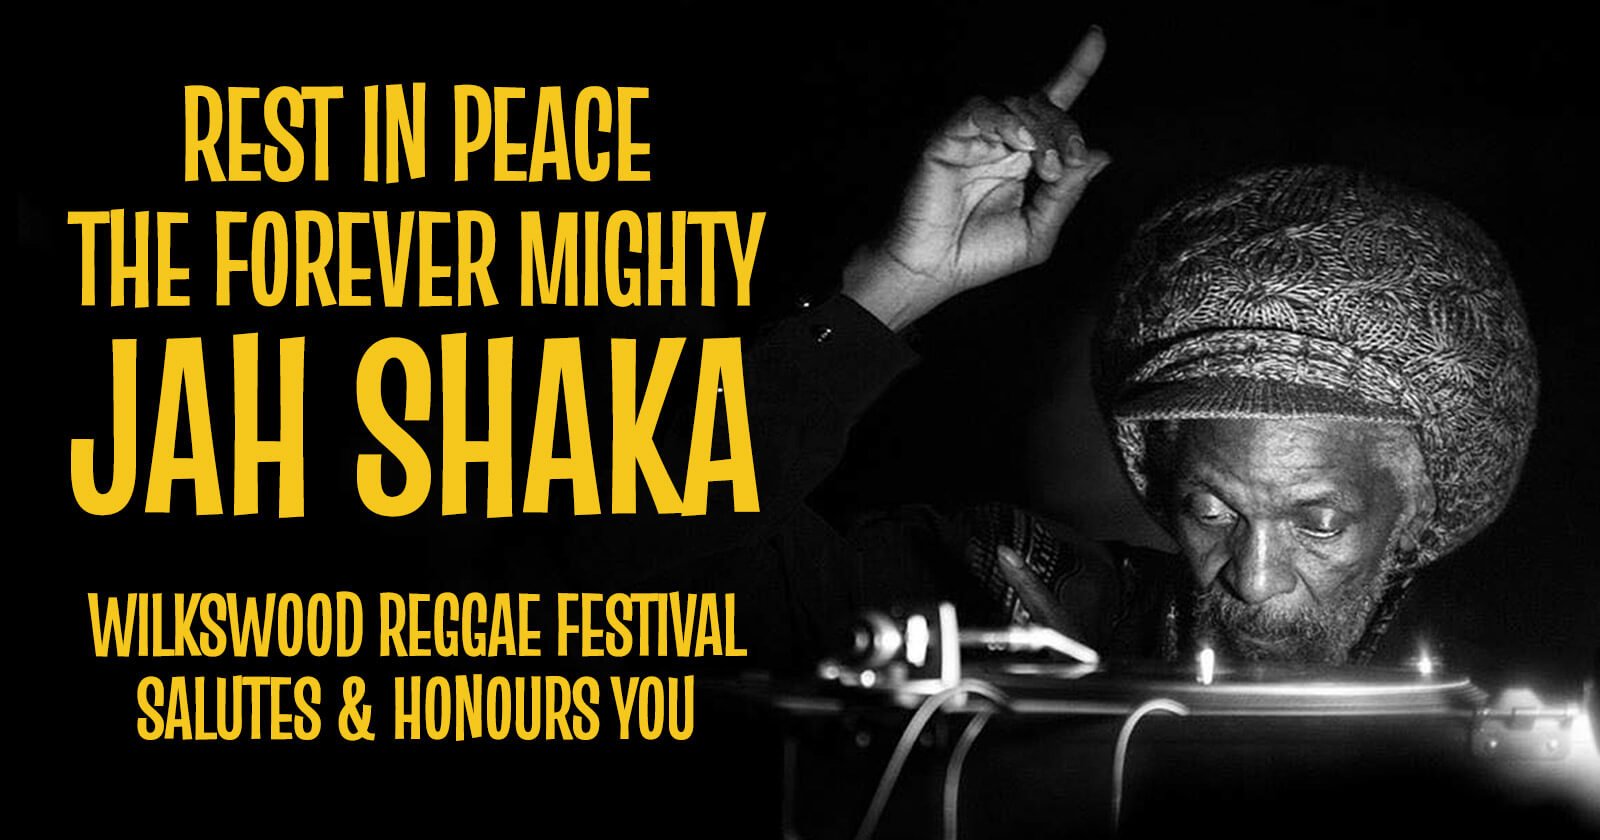 Rest in Peace the Forever Mighty Jah Shaka